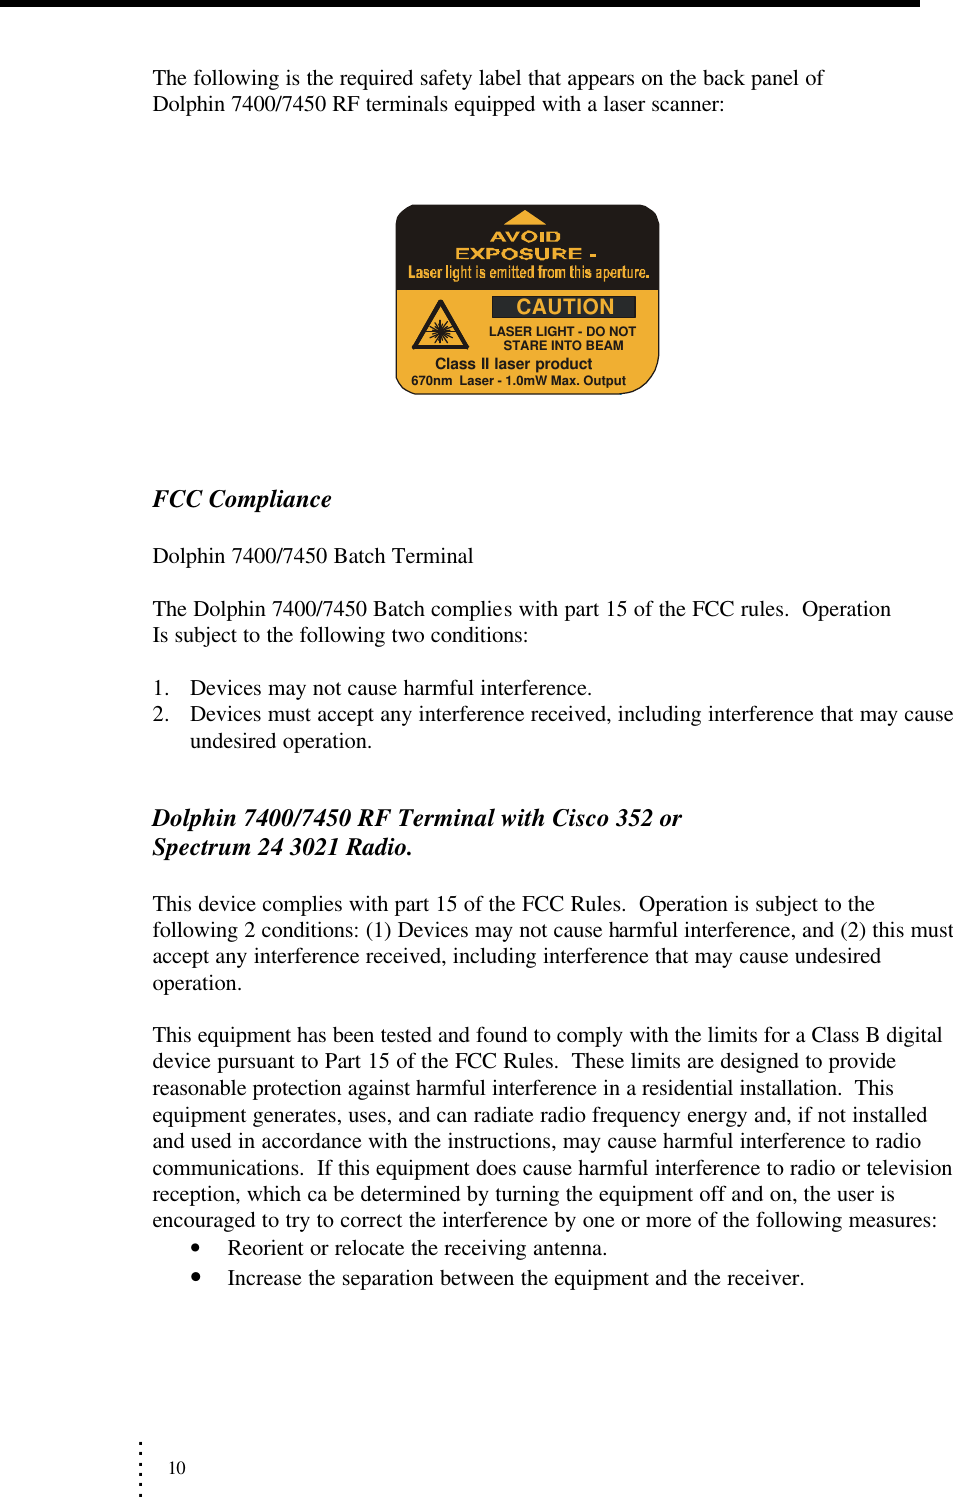             .             .             .             .             .             . 10                 The following is the required safety label that appears on the back panel of    Dolphin 7400/7450 RF terminals equipped with a laser scanner:              FCC Compliance  Dolphin 7400/7450 Batch Terminal  The Dolphin 7400/7450 Batch complies with part 15 of the FCC rules.  Operation   Is subject to the following two conditions:  1. Devices may not cause harmful interference.       2. Devices must accept any interference received, including interference that may cause undesired operation.      Dolphin 7400/7450 RF Terminal with Cisco 352 or                                              Spectrum 24 3021 Radio.  This device complies with part 15 of the FCC Rules.  Operation is subject to the following 2 conditions: (1) Devices may not cause harmful interference, and (2) this must accept any interference received, including interference that may cause undesired operation.  This equipment has been tested and found to comply with the limits for a Class B digital device pursuant to Part 15 of the FCC Rules.  These limits are designed to provide reasonable protection against harmful interference in a residential installation.  This equipment generates, uses, and can radiate radio frequency energy and, if not installed and used in accordance with the instructions, may cause harmful interference to radio communications.  If this equipment does cause harmful interference to radio or television reception, which ca be determined by turning the equipment off and on, the user is encouraged to try to correct the interference by one or more of the following measures: • Reorient or relocate the receiving antenna. • Increase the separation between the equipment and the receiver. LASER LIGHT - DO NOTSTARE INTO BEAM670nm  Laser - 1.0mW Max. OutputClass II laser productCAUTION 